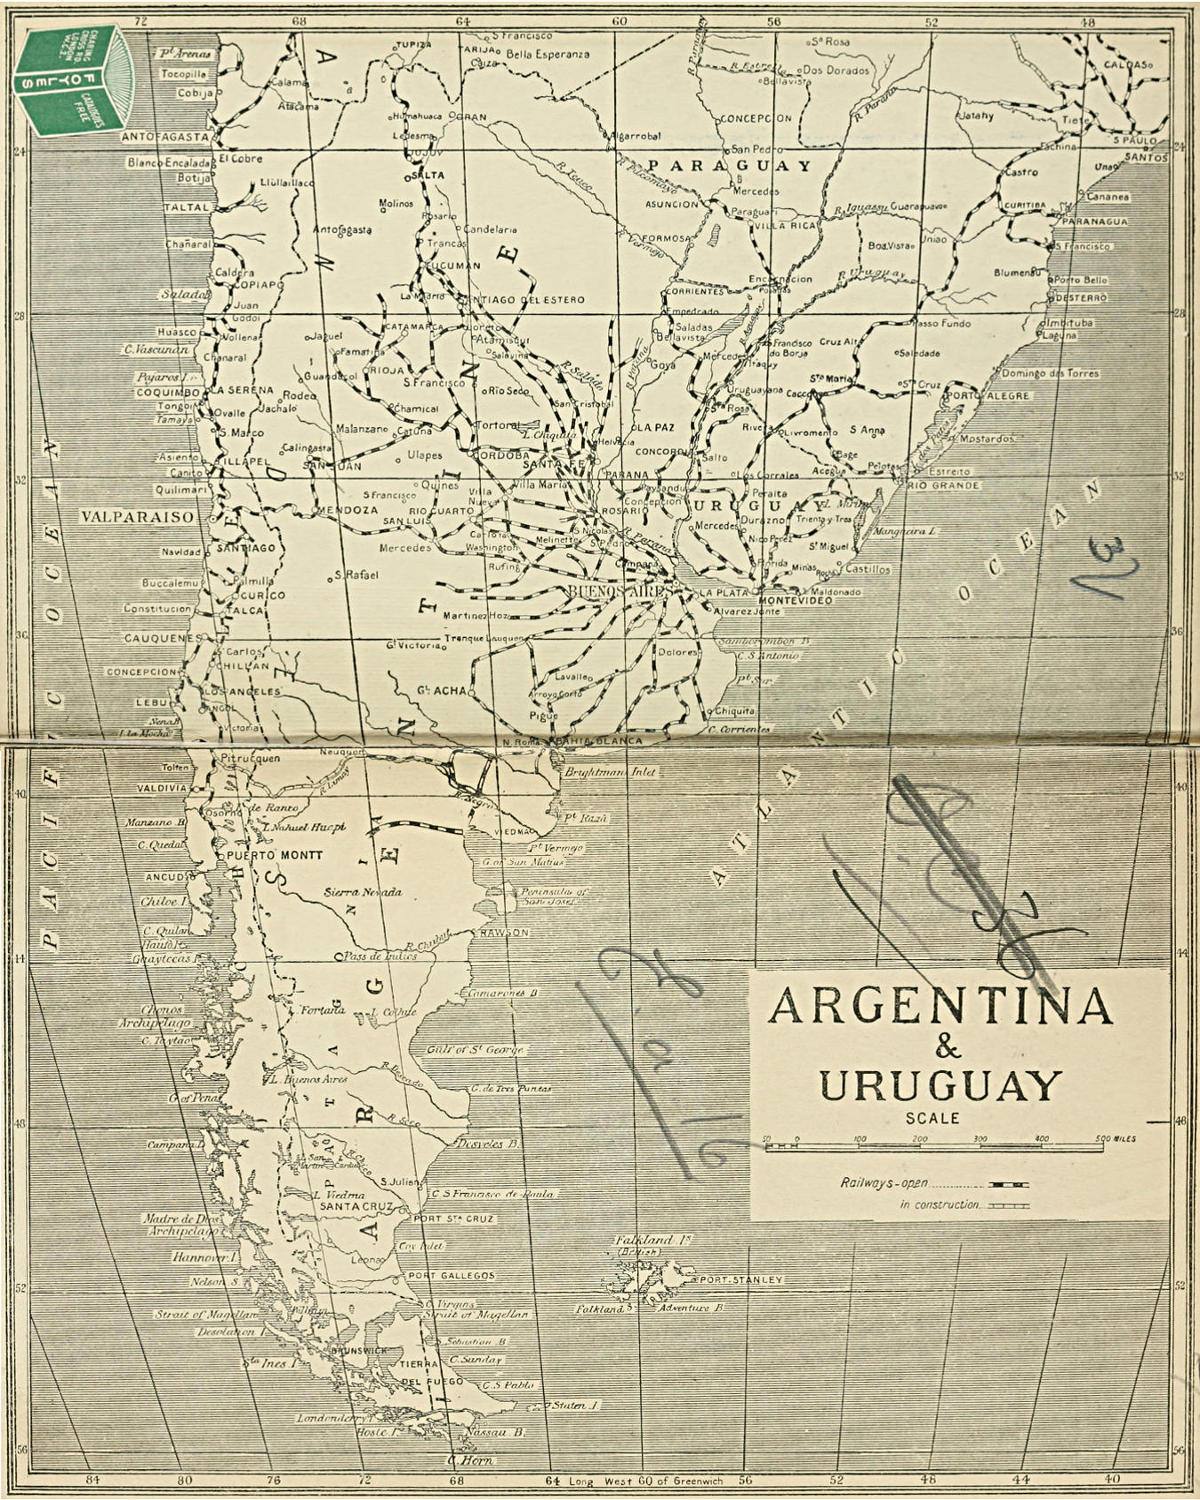 Argentina c.1908 Buenos Ayres Midland Railway A Pair of Maps During  Construction